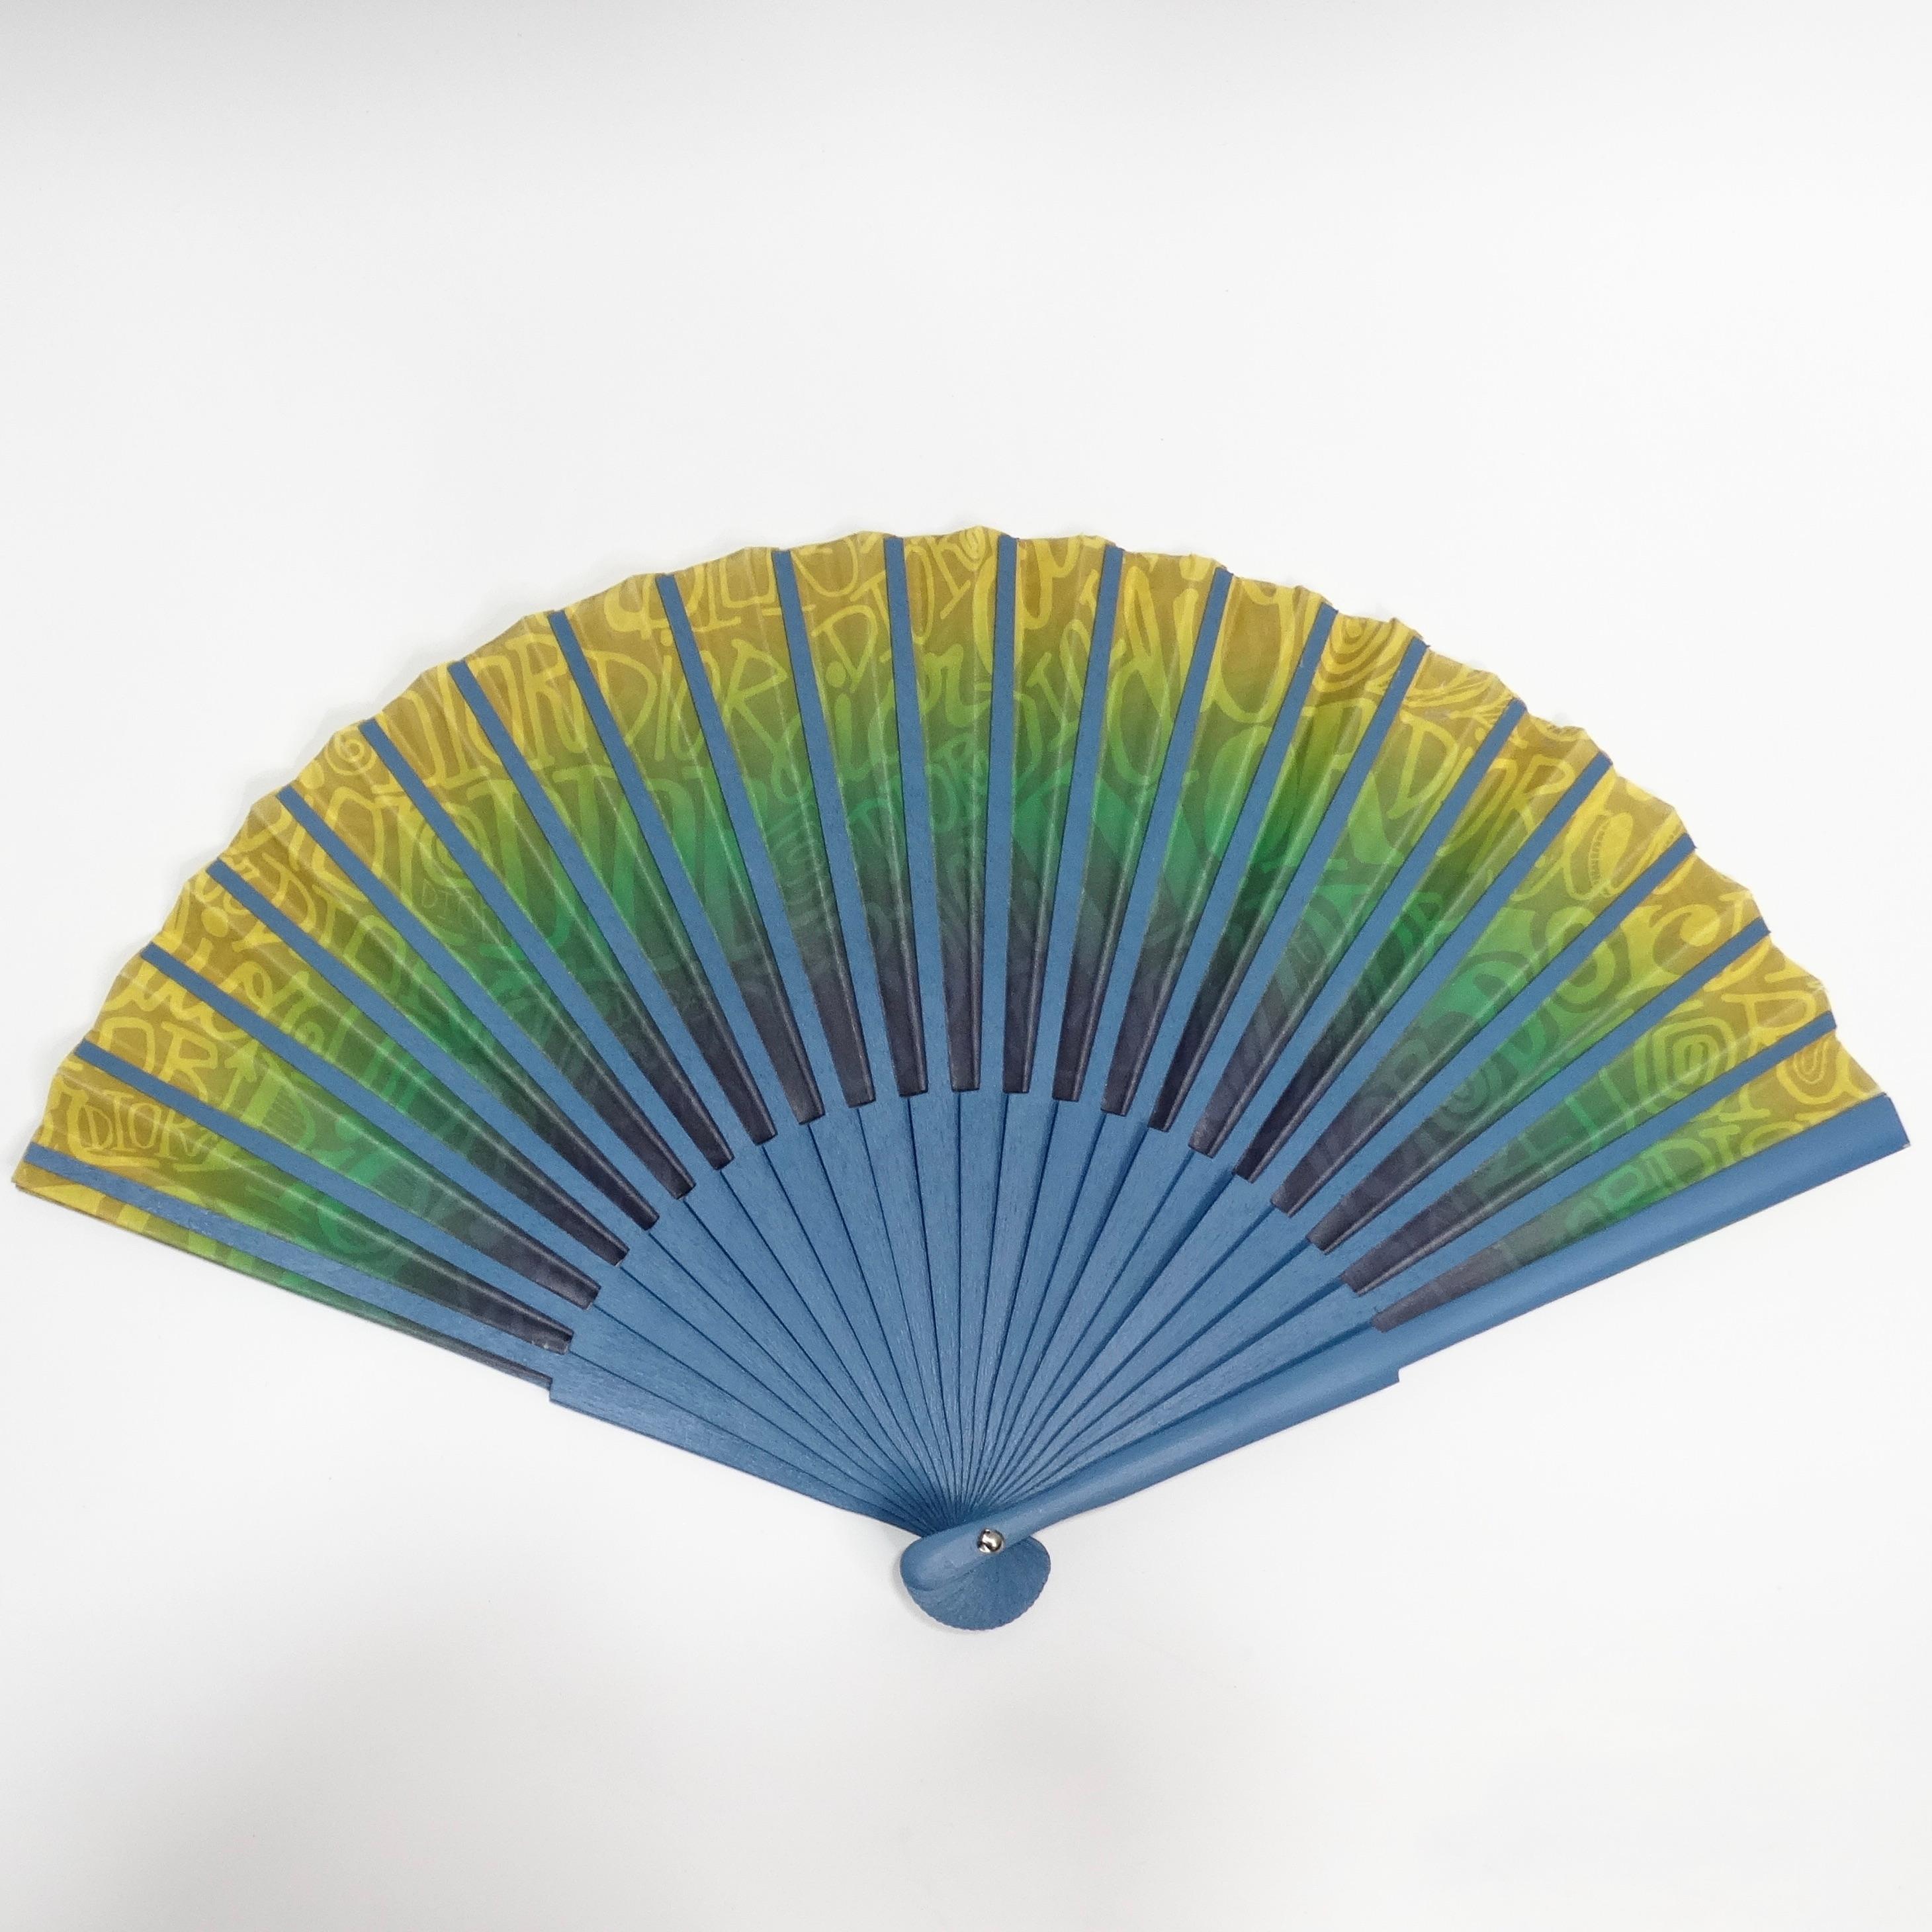 Introducing the Christian Dior Stussy Folding Fan, an extraordinary piece born from the collaboration between two iconic brands. This folding fan features a vibrant blue, green, and yellow gradient that transitions beautifully across the pleated